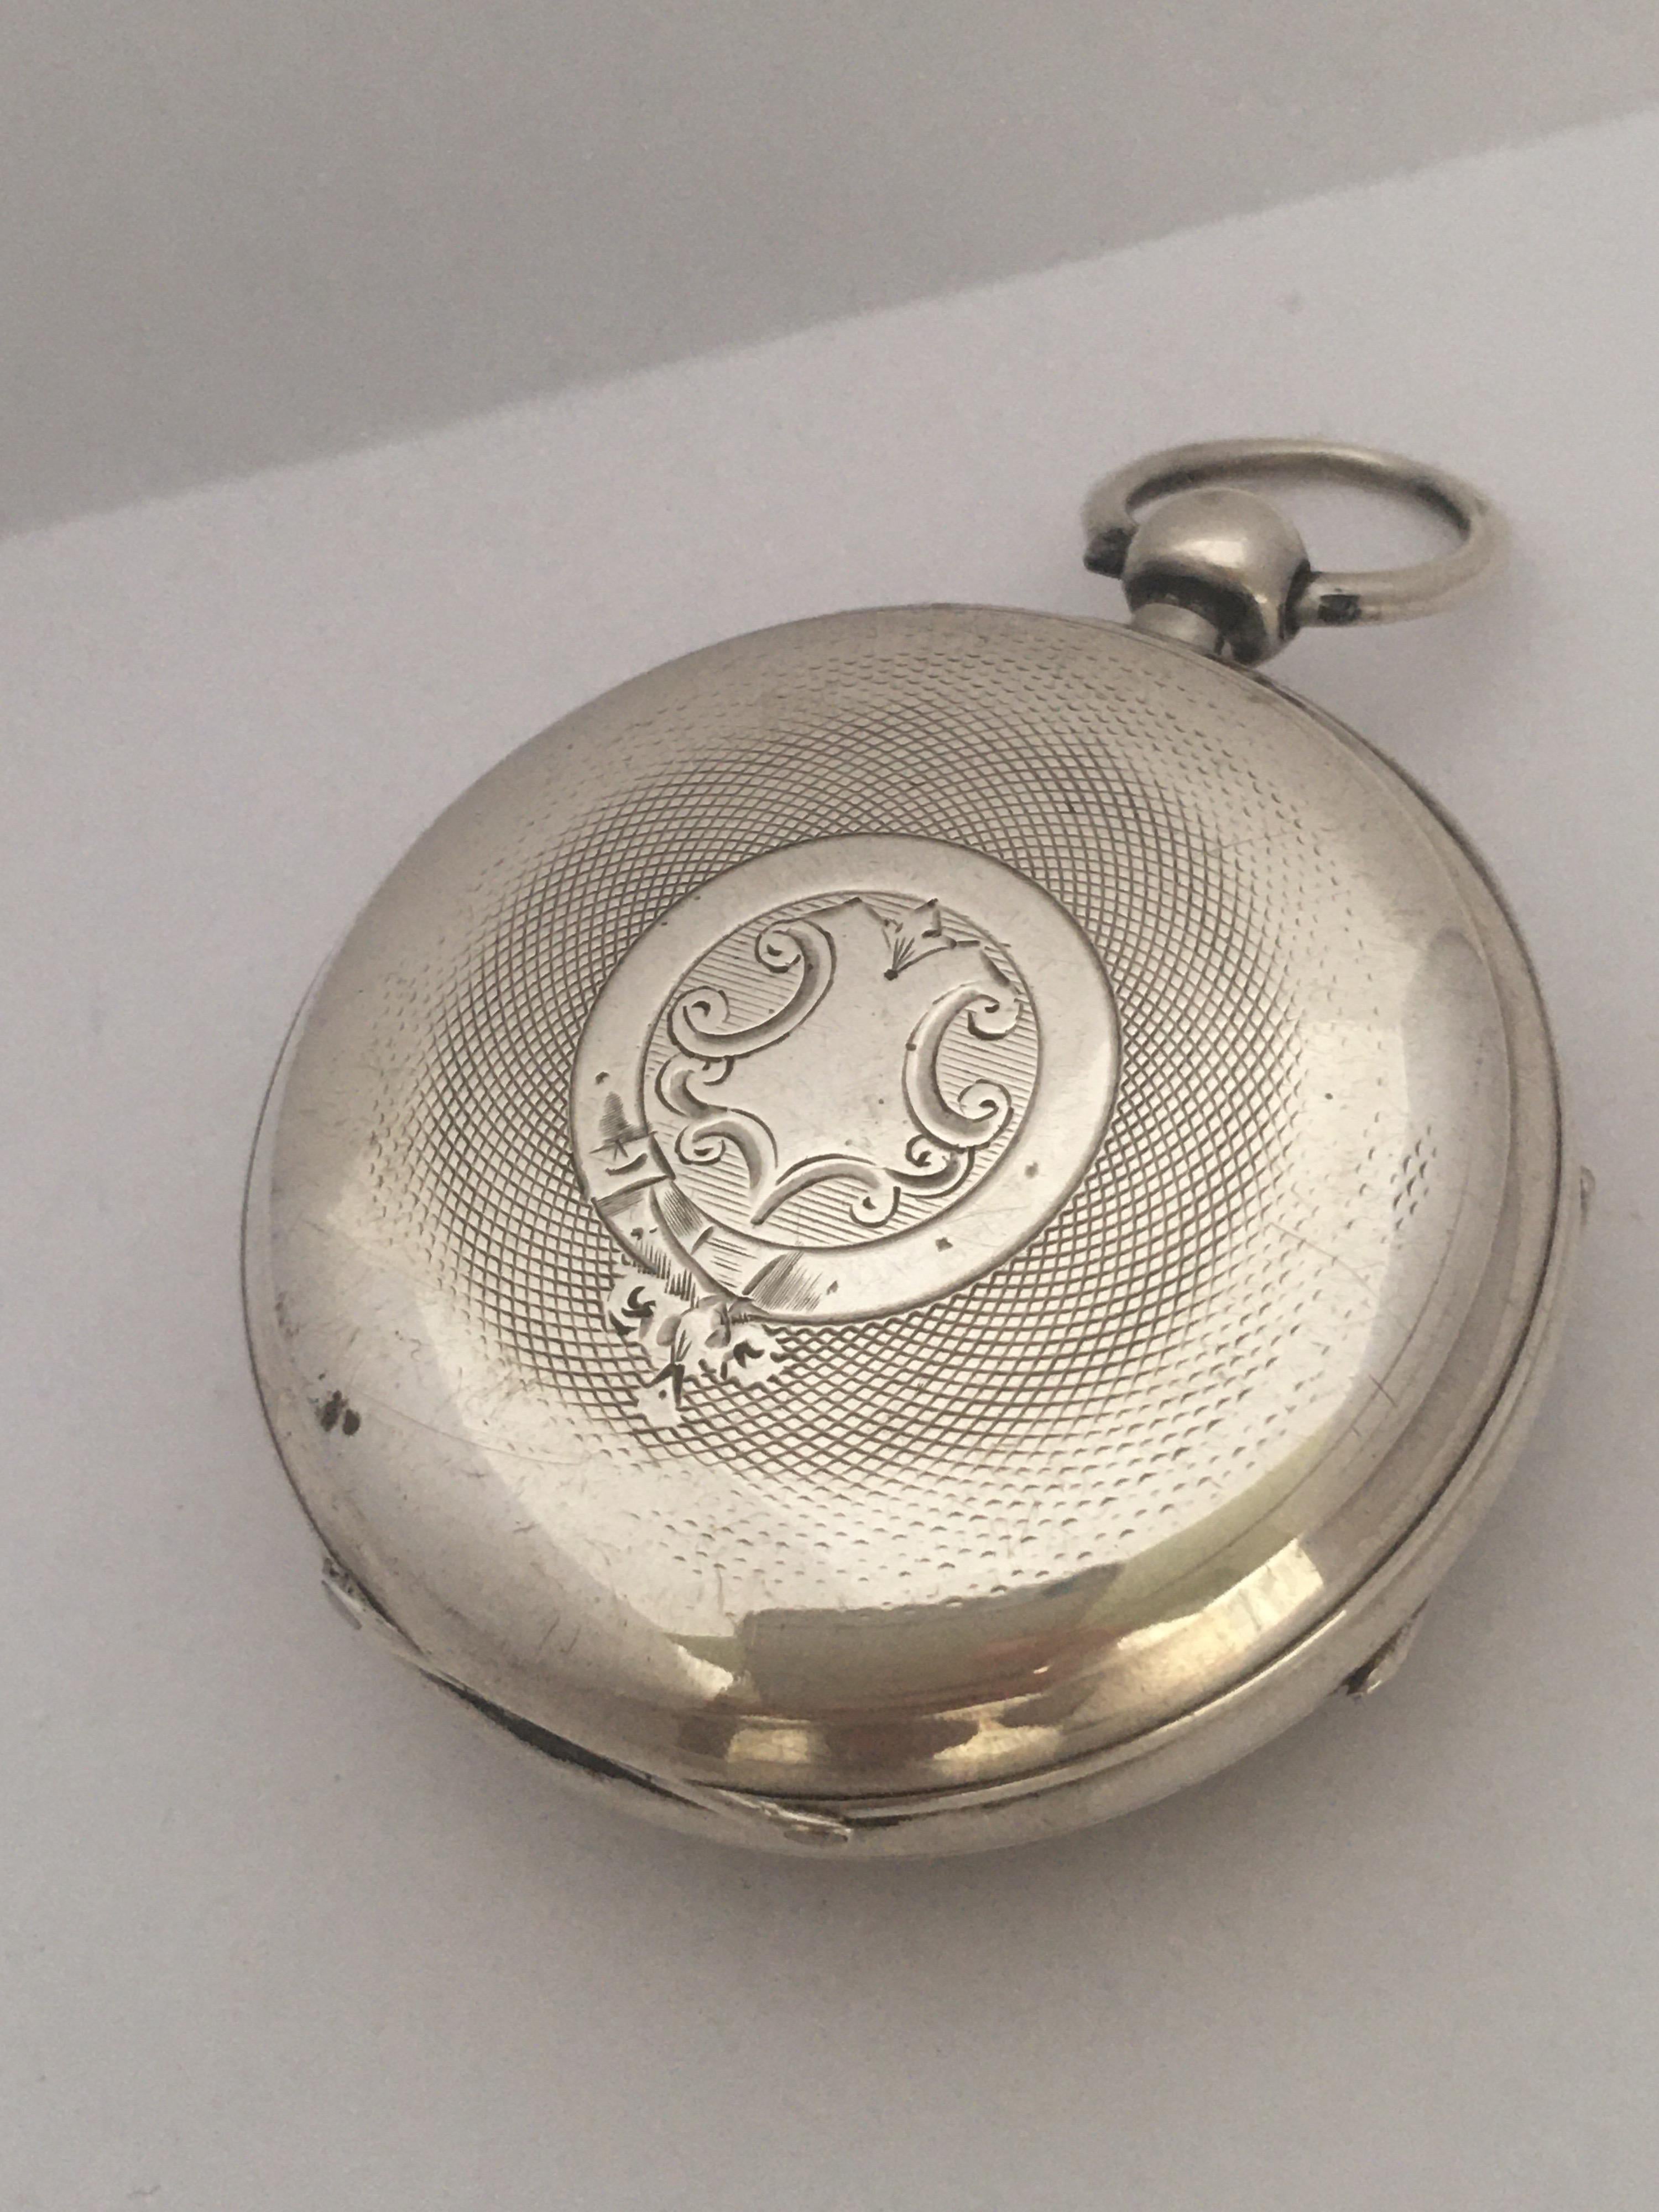 This beautiful antique Silver engine turned cased English Lever pocket watch is in good working condition and it is running well. It comes with a winding key.

Please study the images carefully as form part of the description. 